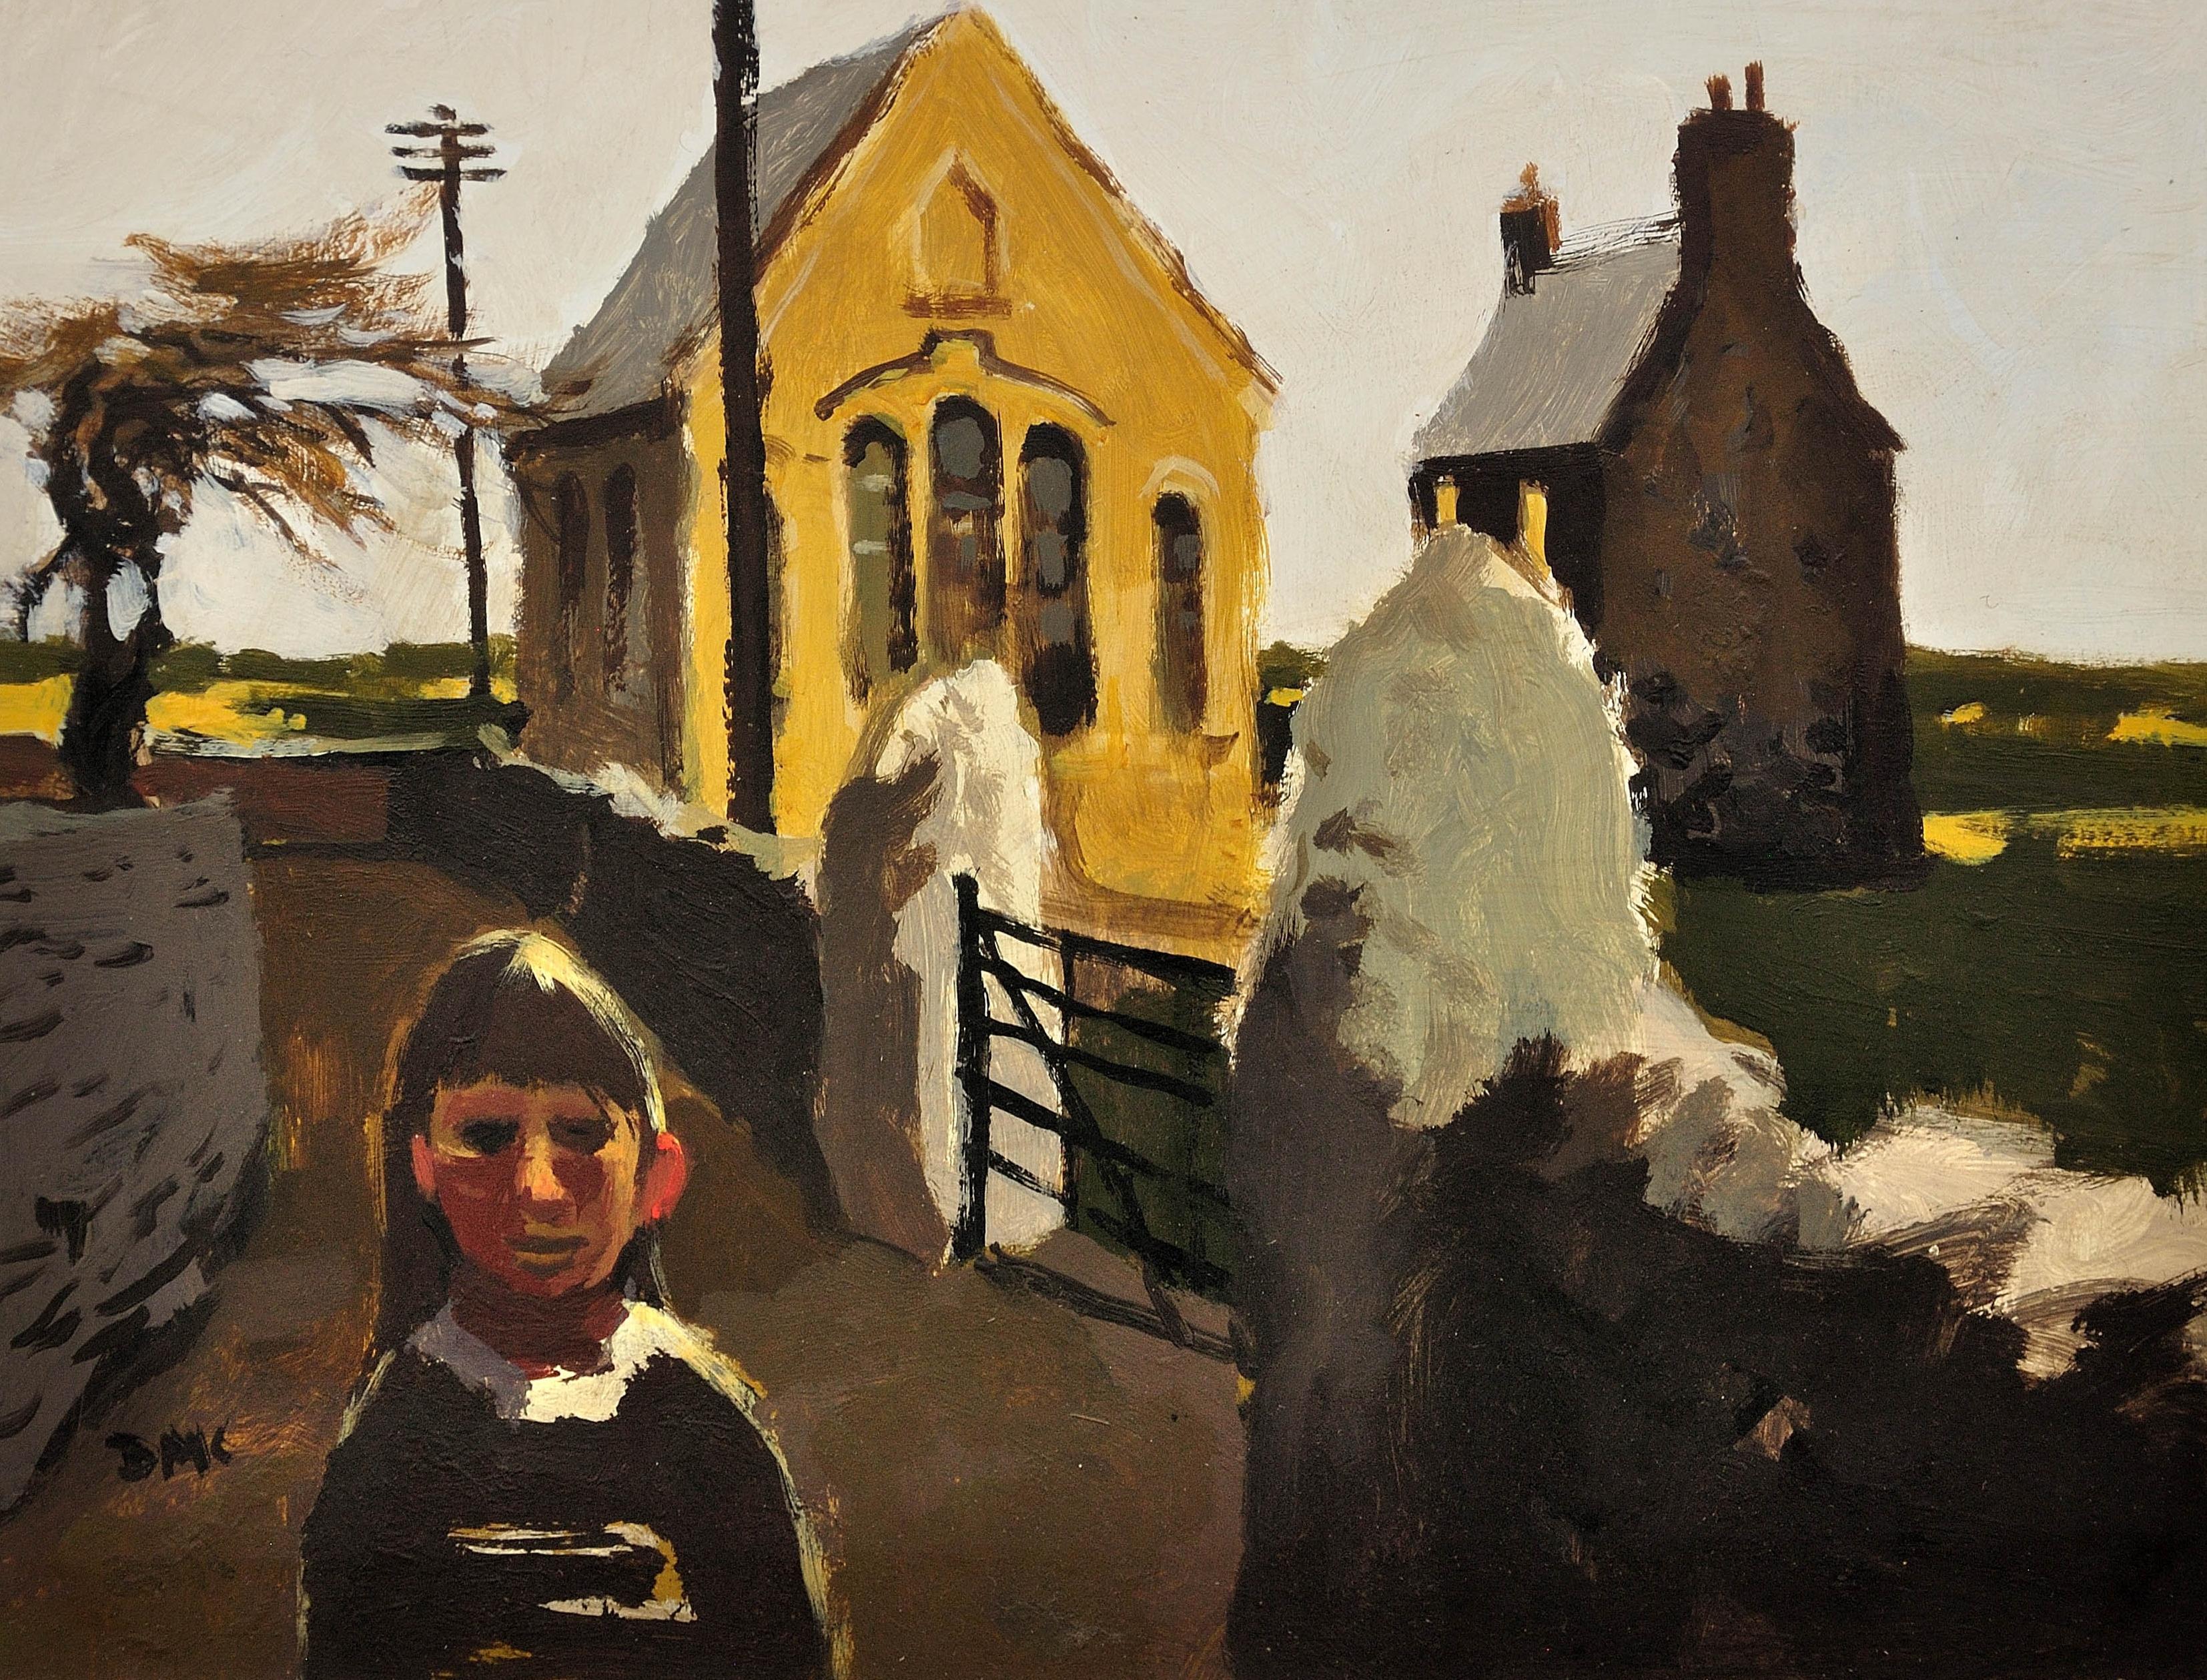 Donald McIntyre.
English ( b.1923 - d.2009 ).
Girl and Chapel, North Wales. 
Oil on card.
Signed with monogram twice lower left.
Image size 12 inches x 15.6 inches ( 30.5cm x 39.5cm ).
Frame size 19.5 inches x 22.8 inches ( 49.5cm x 58cm ).